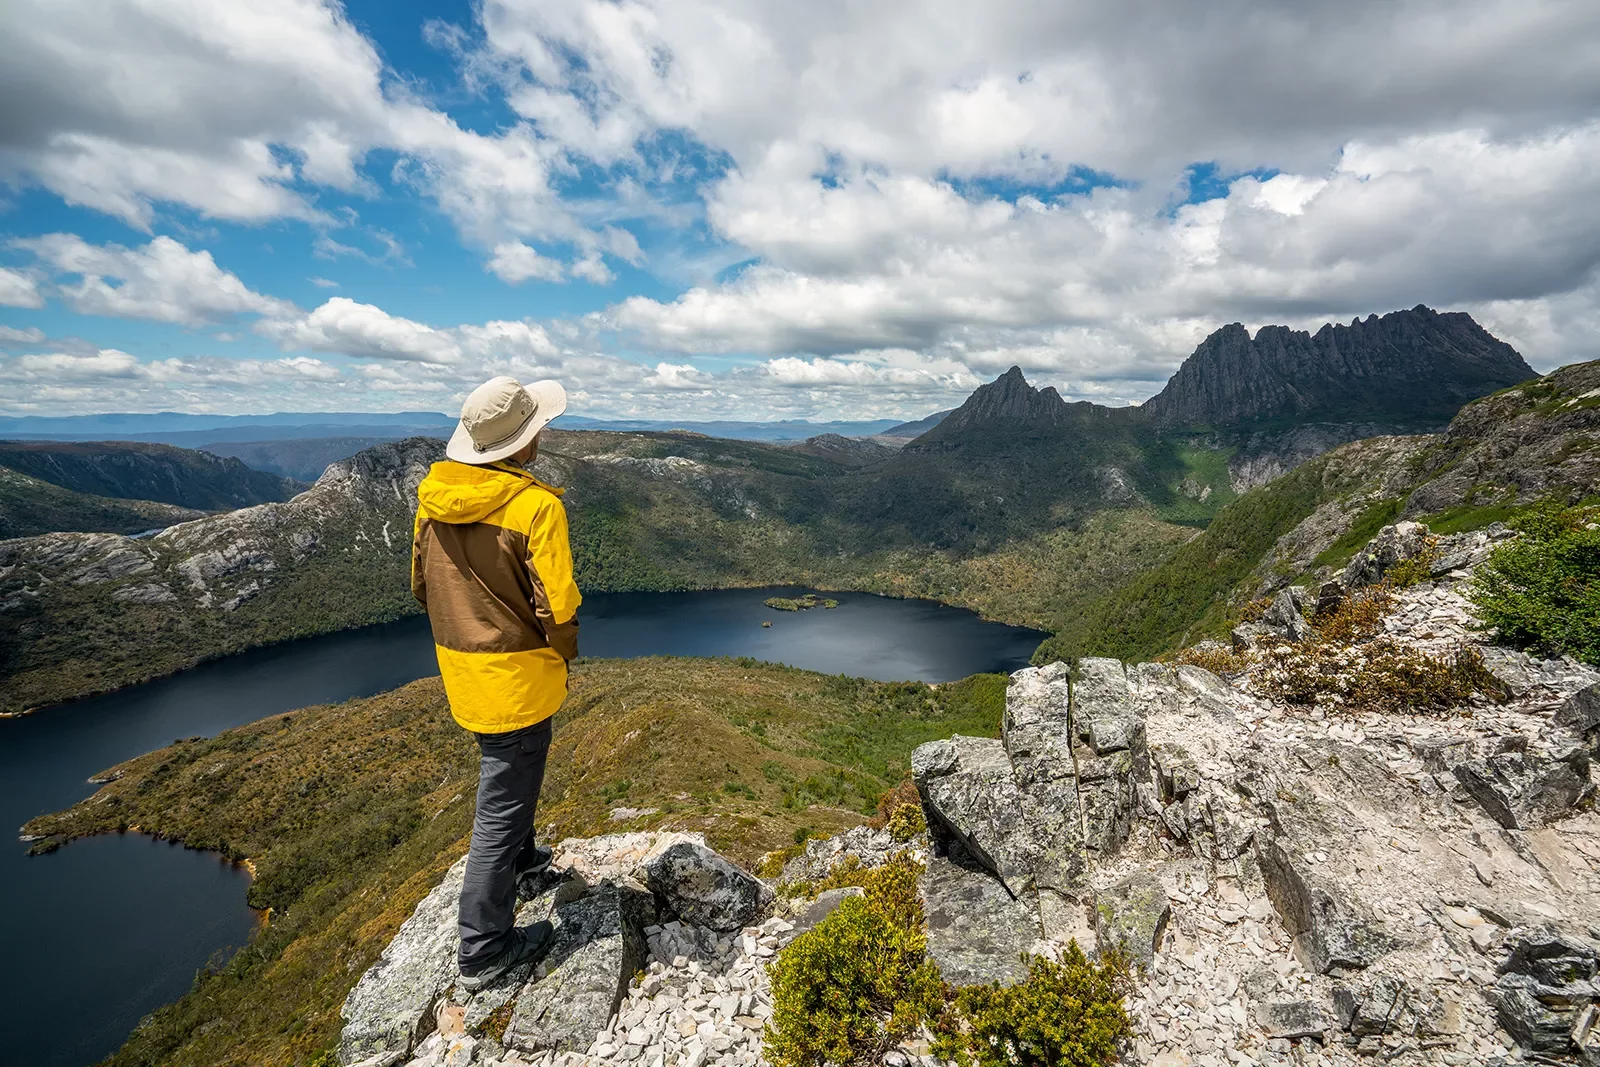 Hiker explores landscape of Marions lookout trail in Cradle Mountain National Park in Tasmania, Australia.